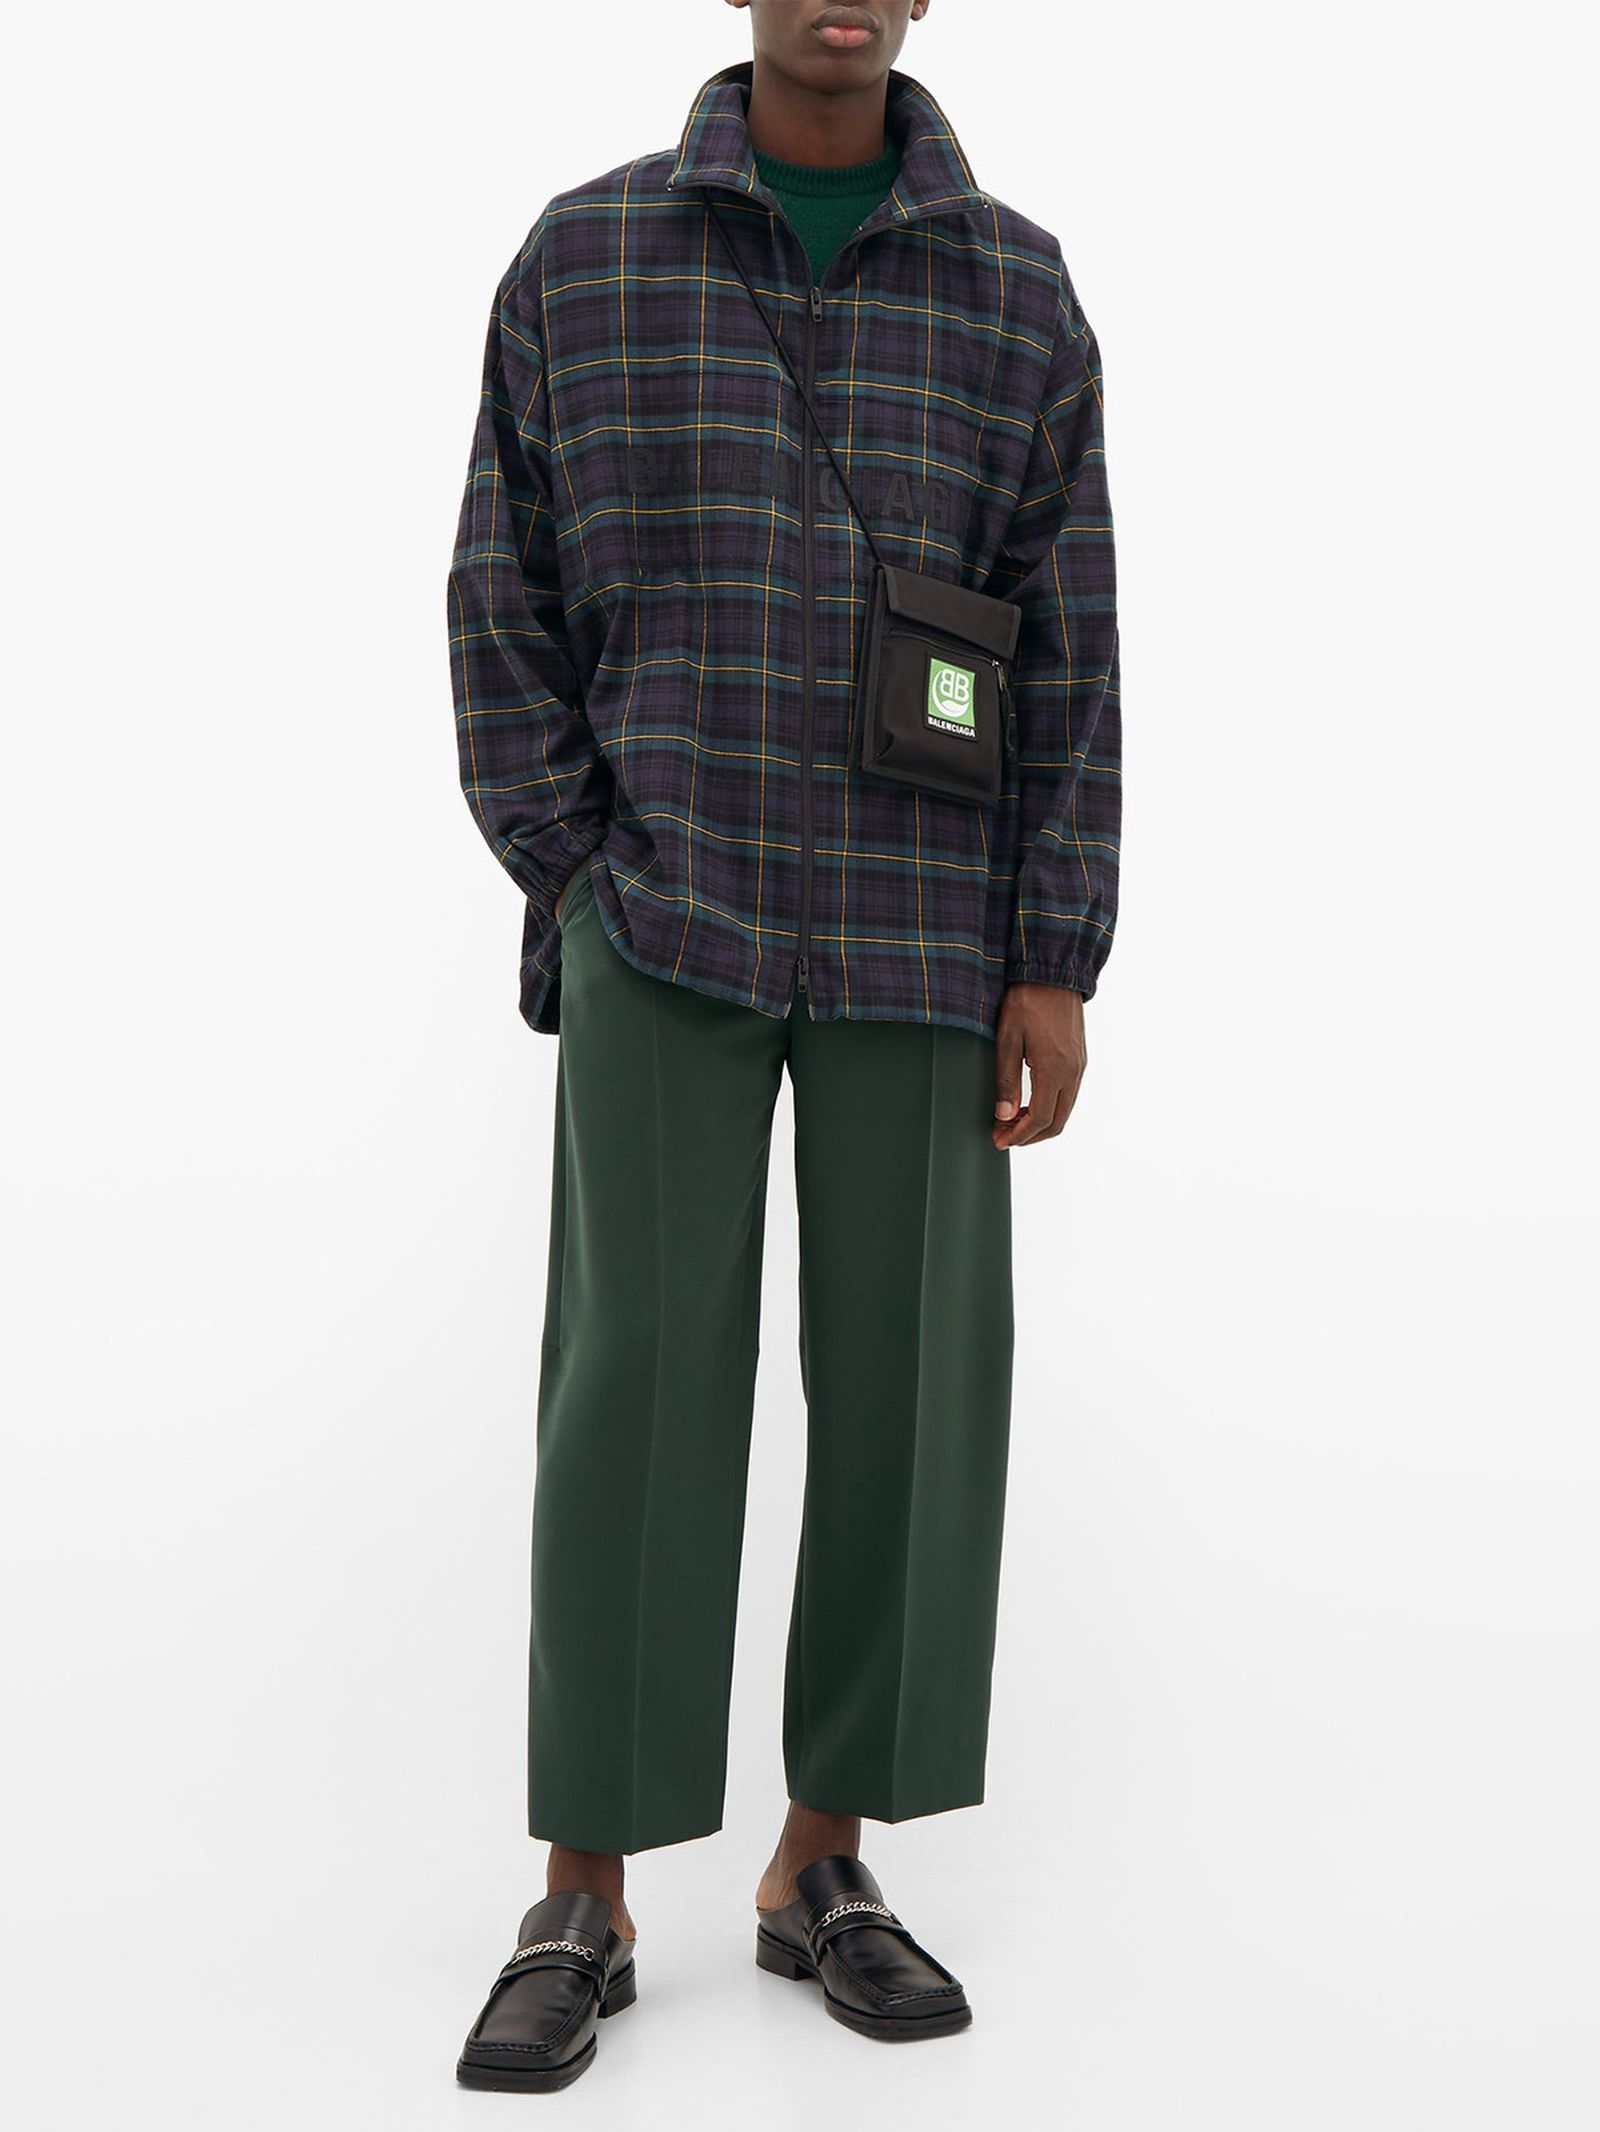 matchesfashion-best-formal-trousers-for-men-main